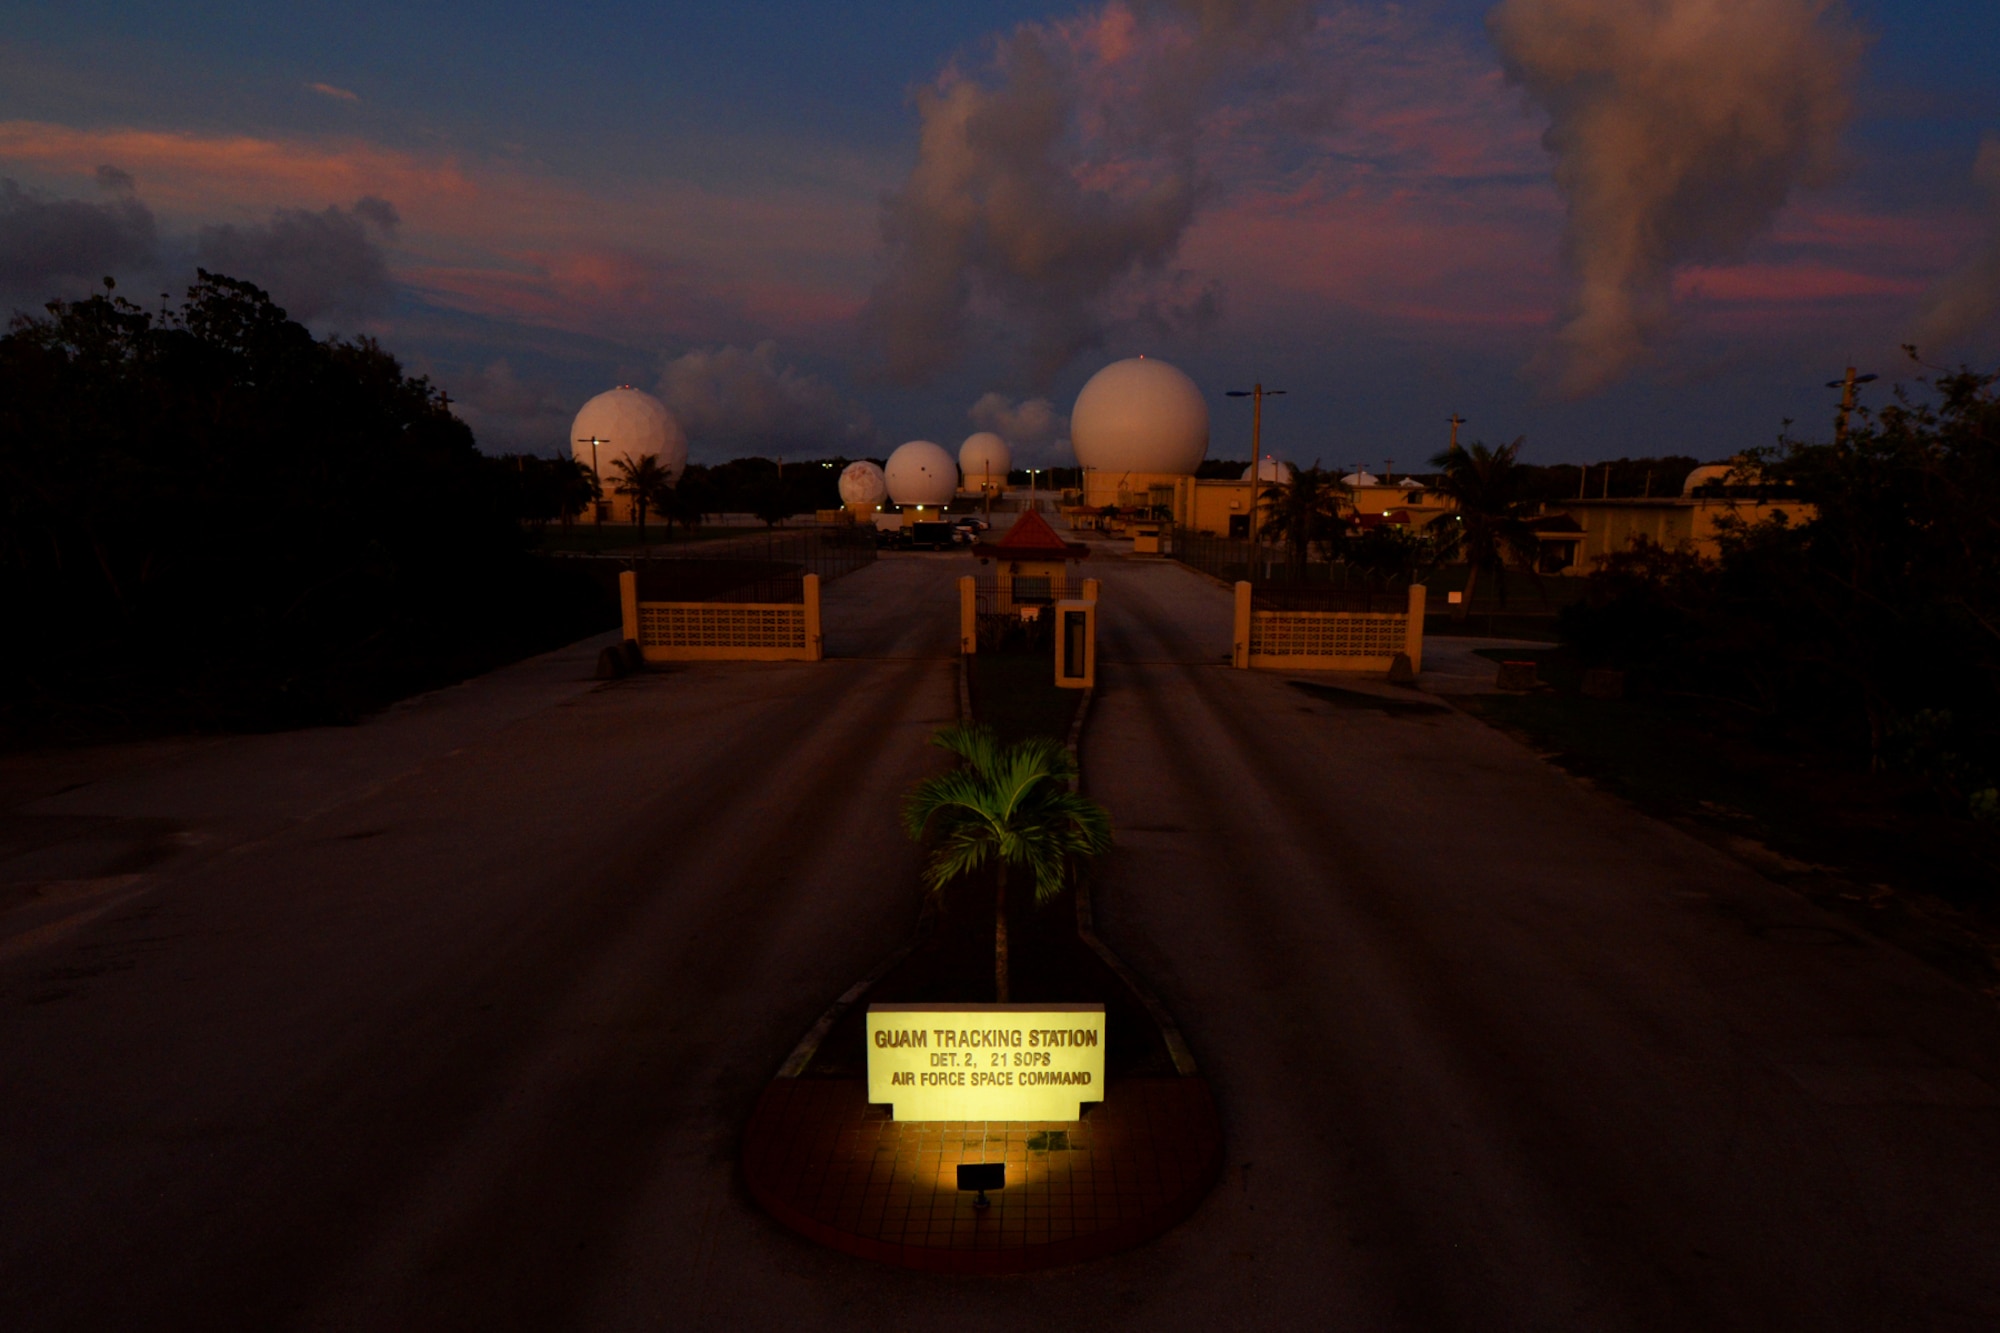 The sun sets on the 21st Space Operations Squadron Detachment 2 tracking station Sept. 15, 2015, at Northwest Field on Andersen Air Force Base, Guam. The 21st SOPS Det 2 celebrated its 50th anniversary with a ceremony here Sept. 17, 2015.(U.S. Air Force photo by Airman 1st Class Alexa Ann Henderson/Released)